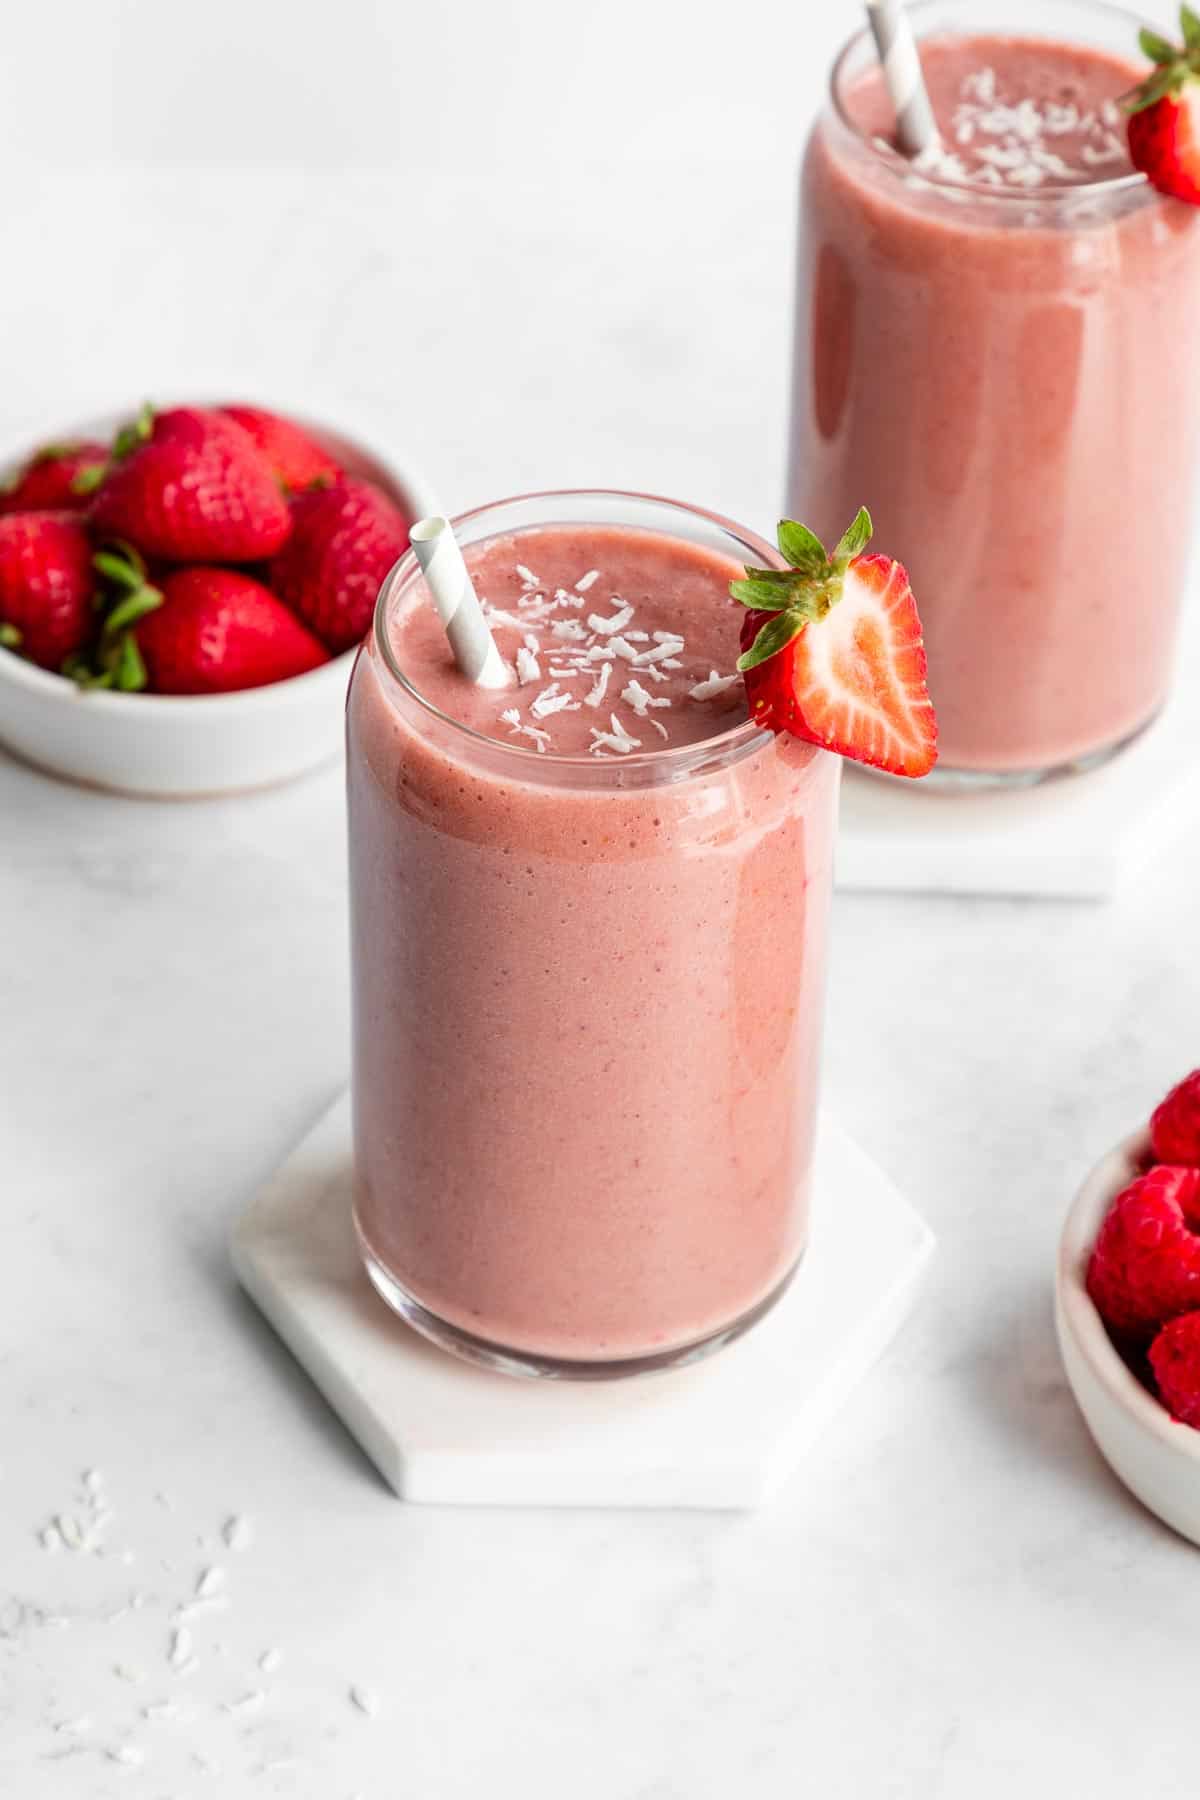 a strawberry banana smoothie inside a glass beside a bowl of berries